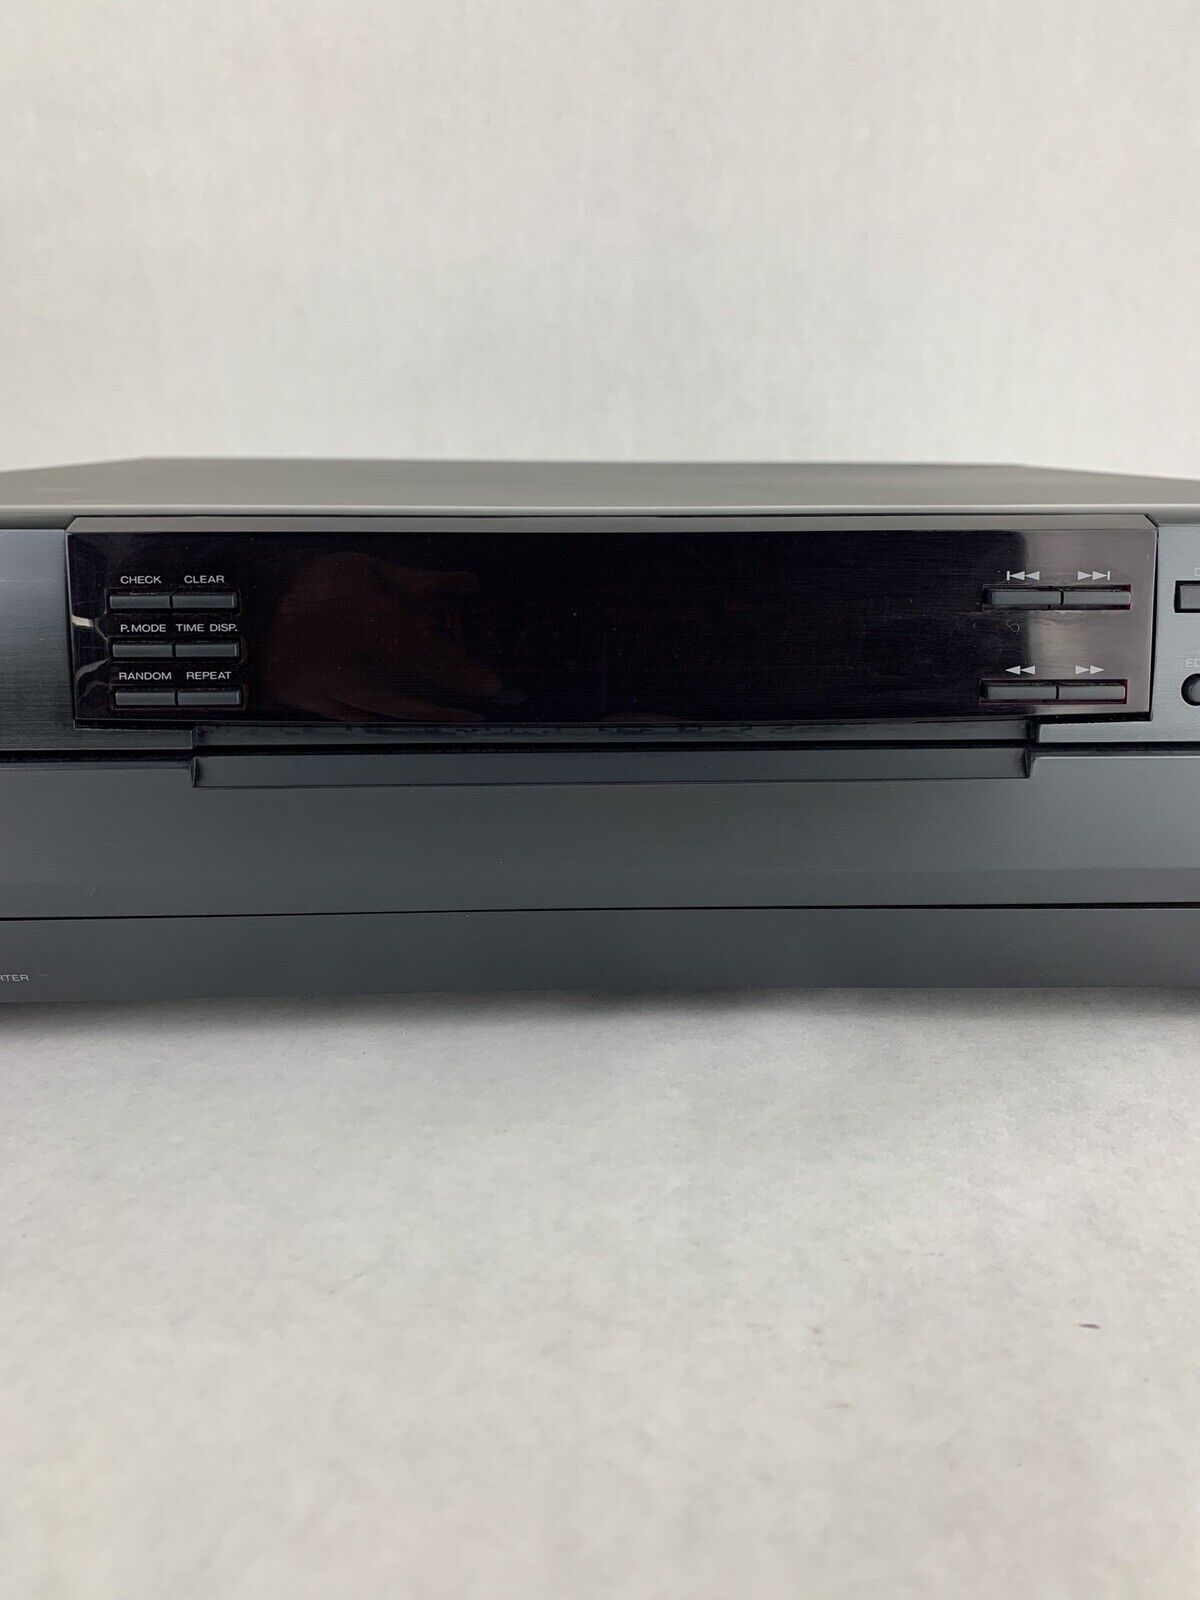 Kenwood CD-204 5-Disc CD Changer Missing Remote Broken Stop/Pause Buttons Tested